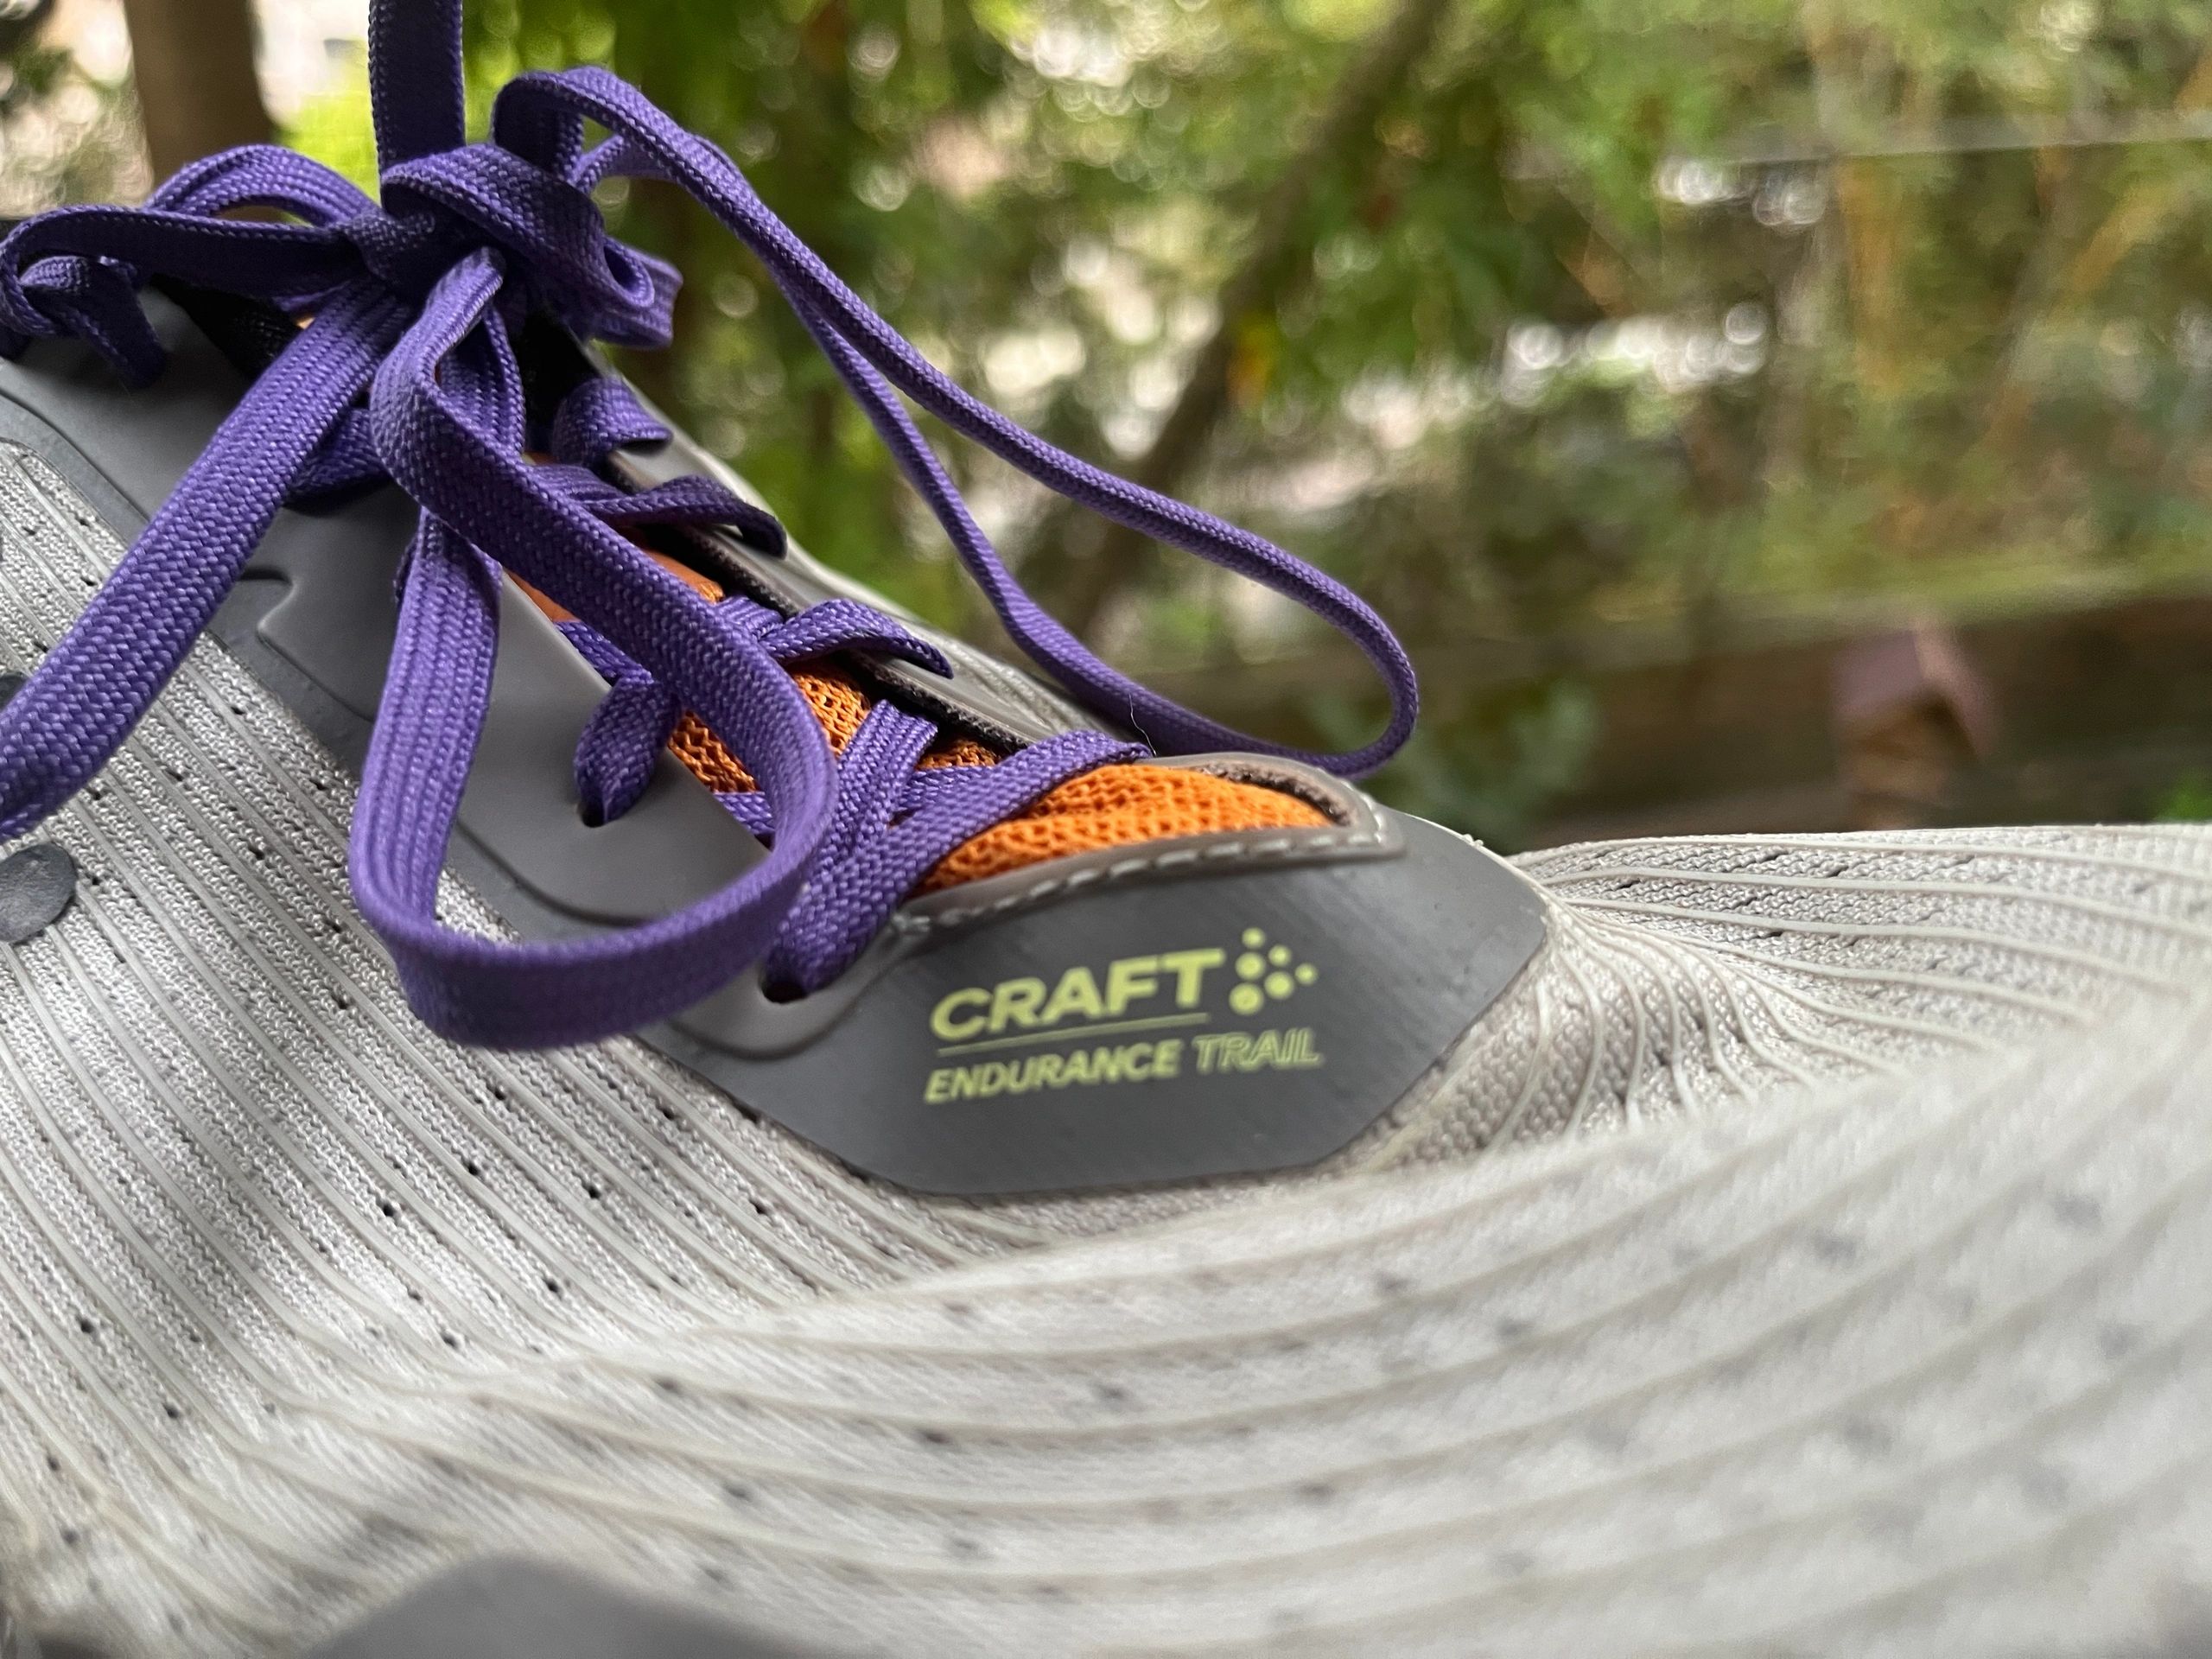 Craft Endurance Trail Review: Looks Great, but Fit Issues Abound